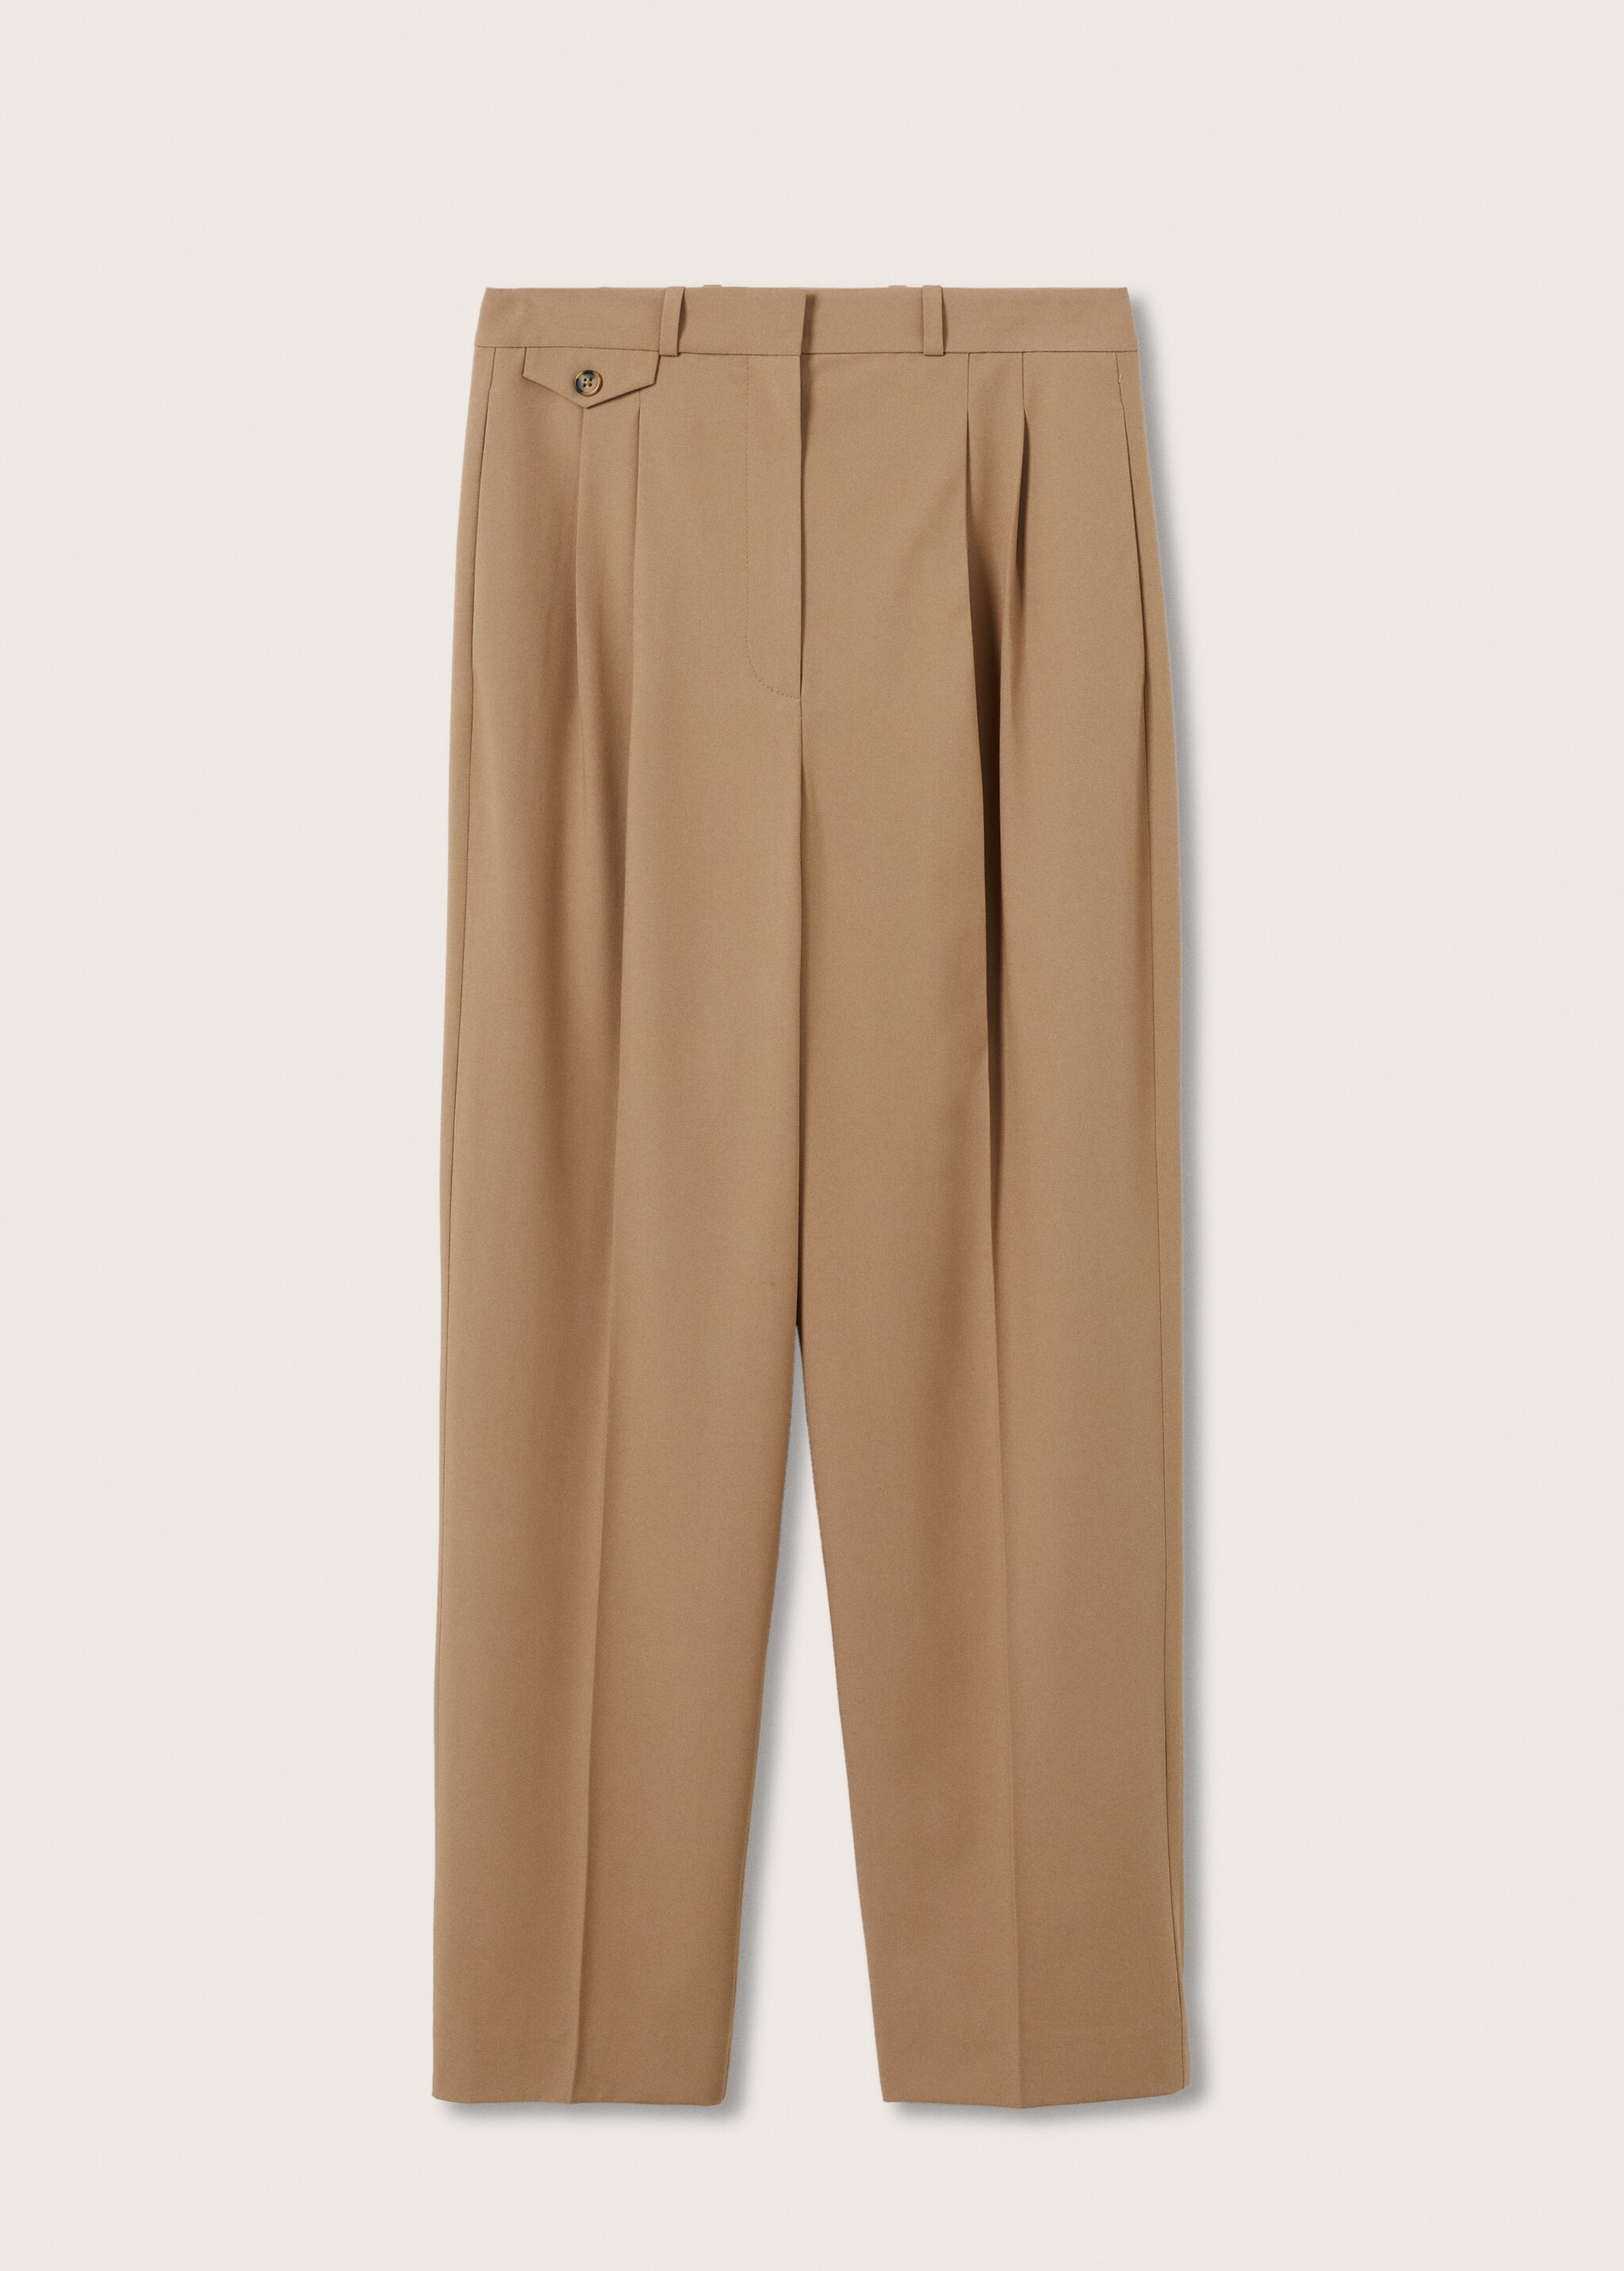 Pockets straight trousers - Article without model